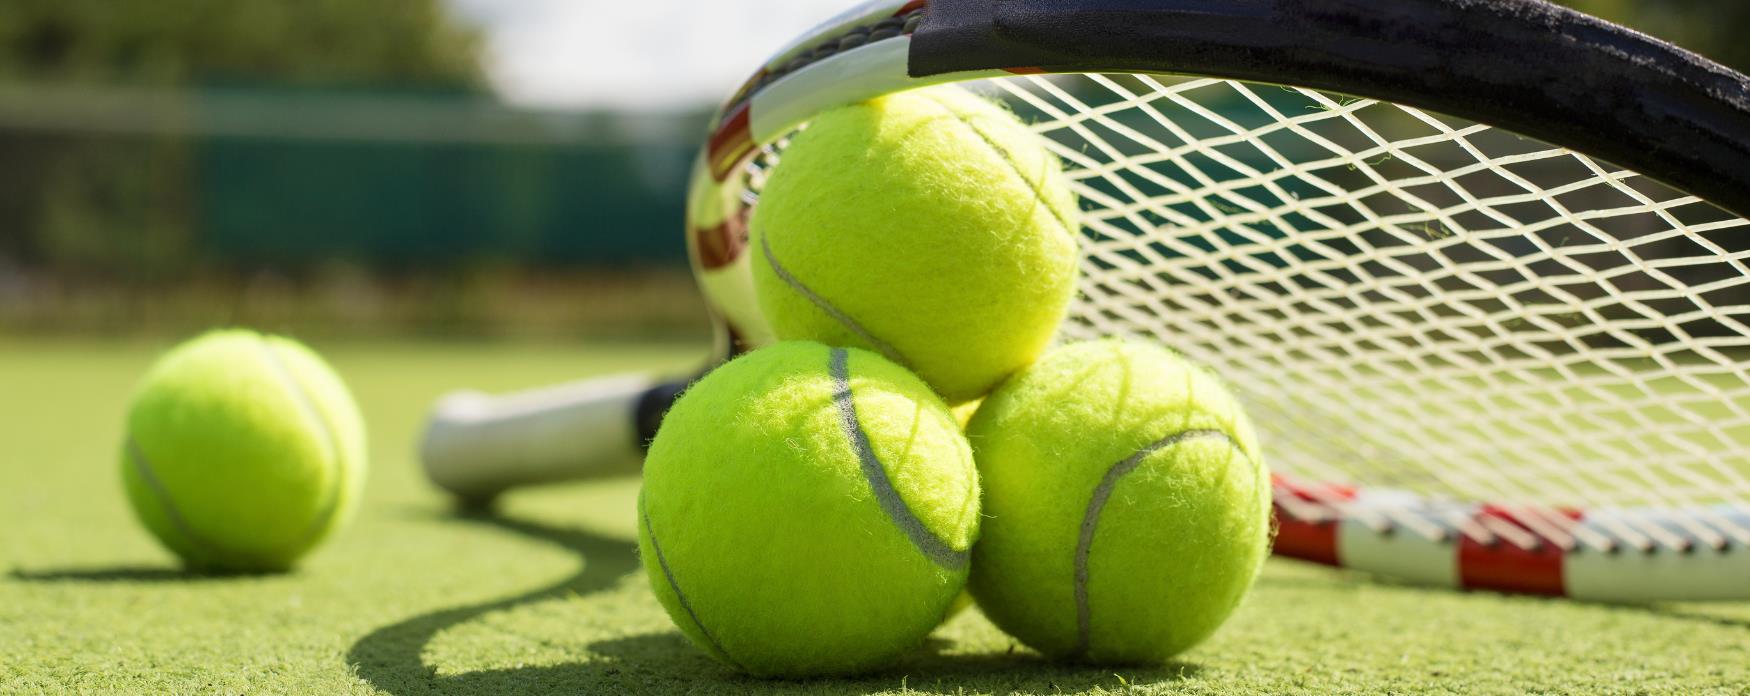 An Image of one tennis racket and four tennis balls on a tennis court